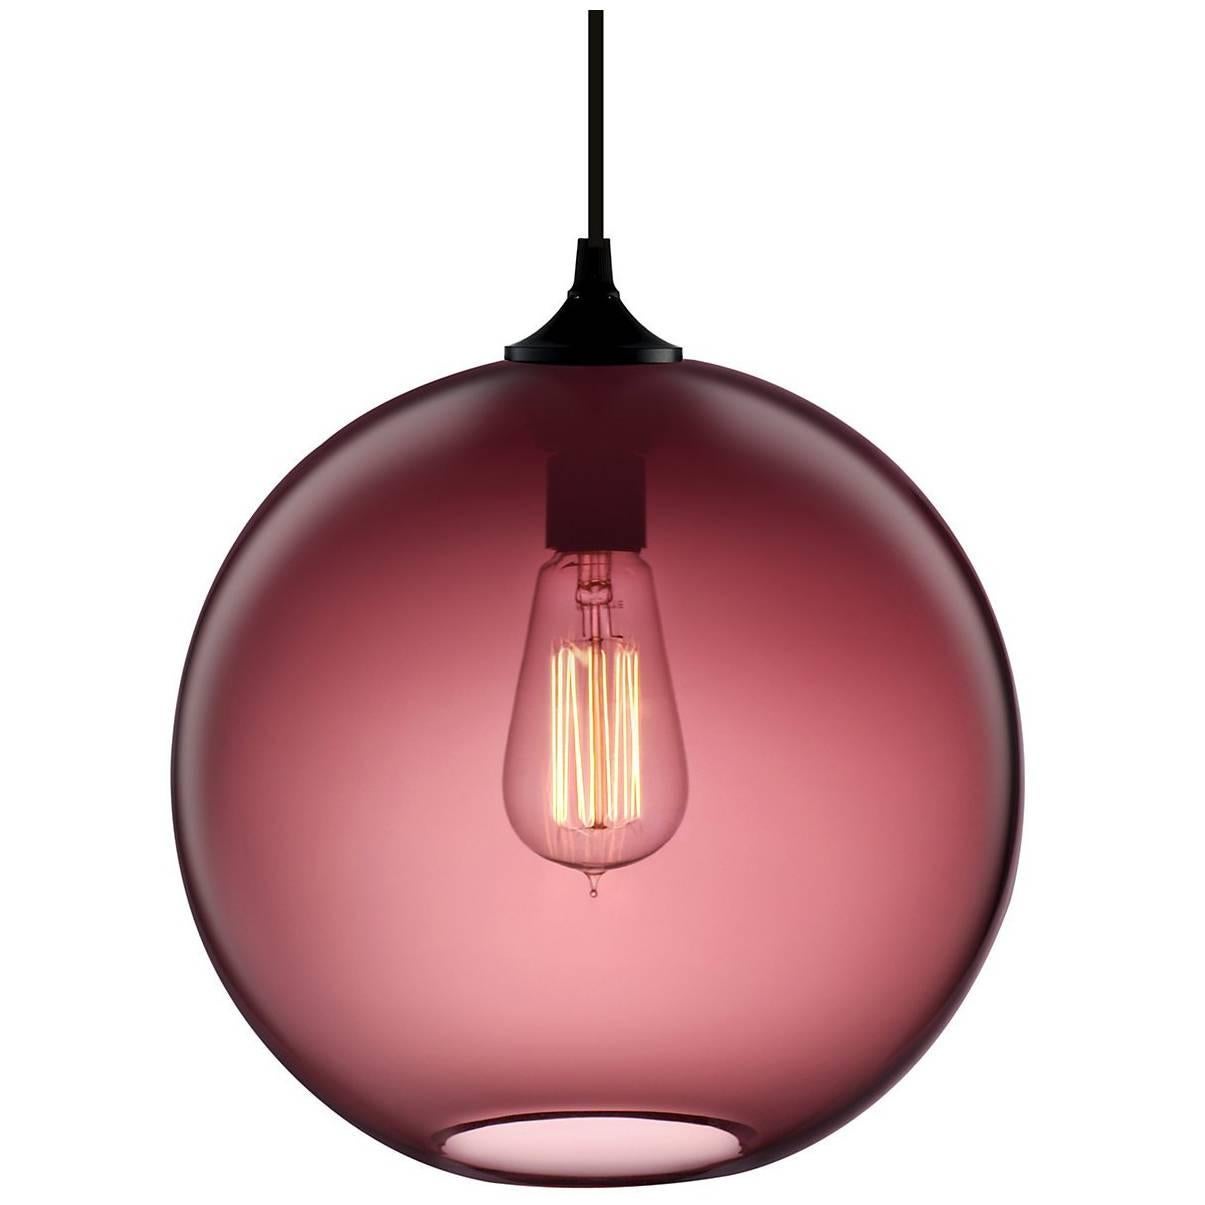 Solitaire Plum Handblown Modern Glass Pendant Light, Made in the USA For Sale